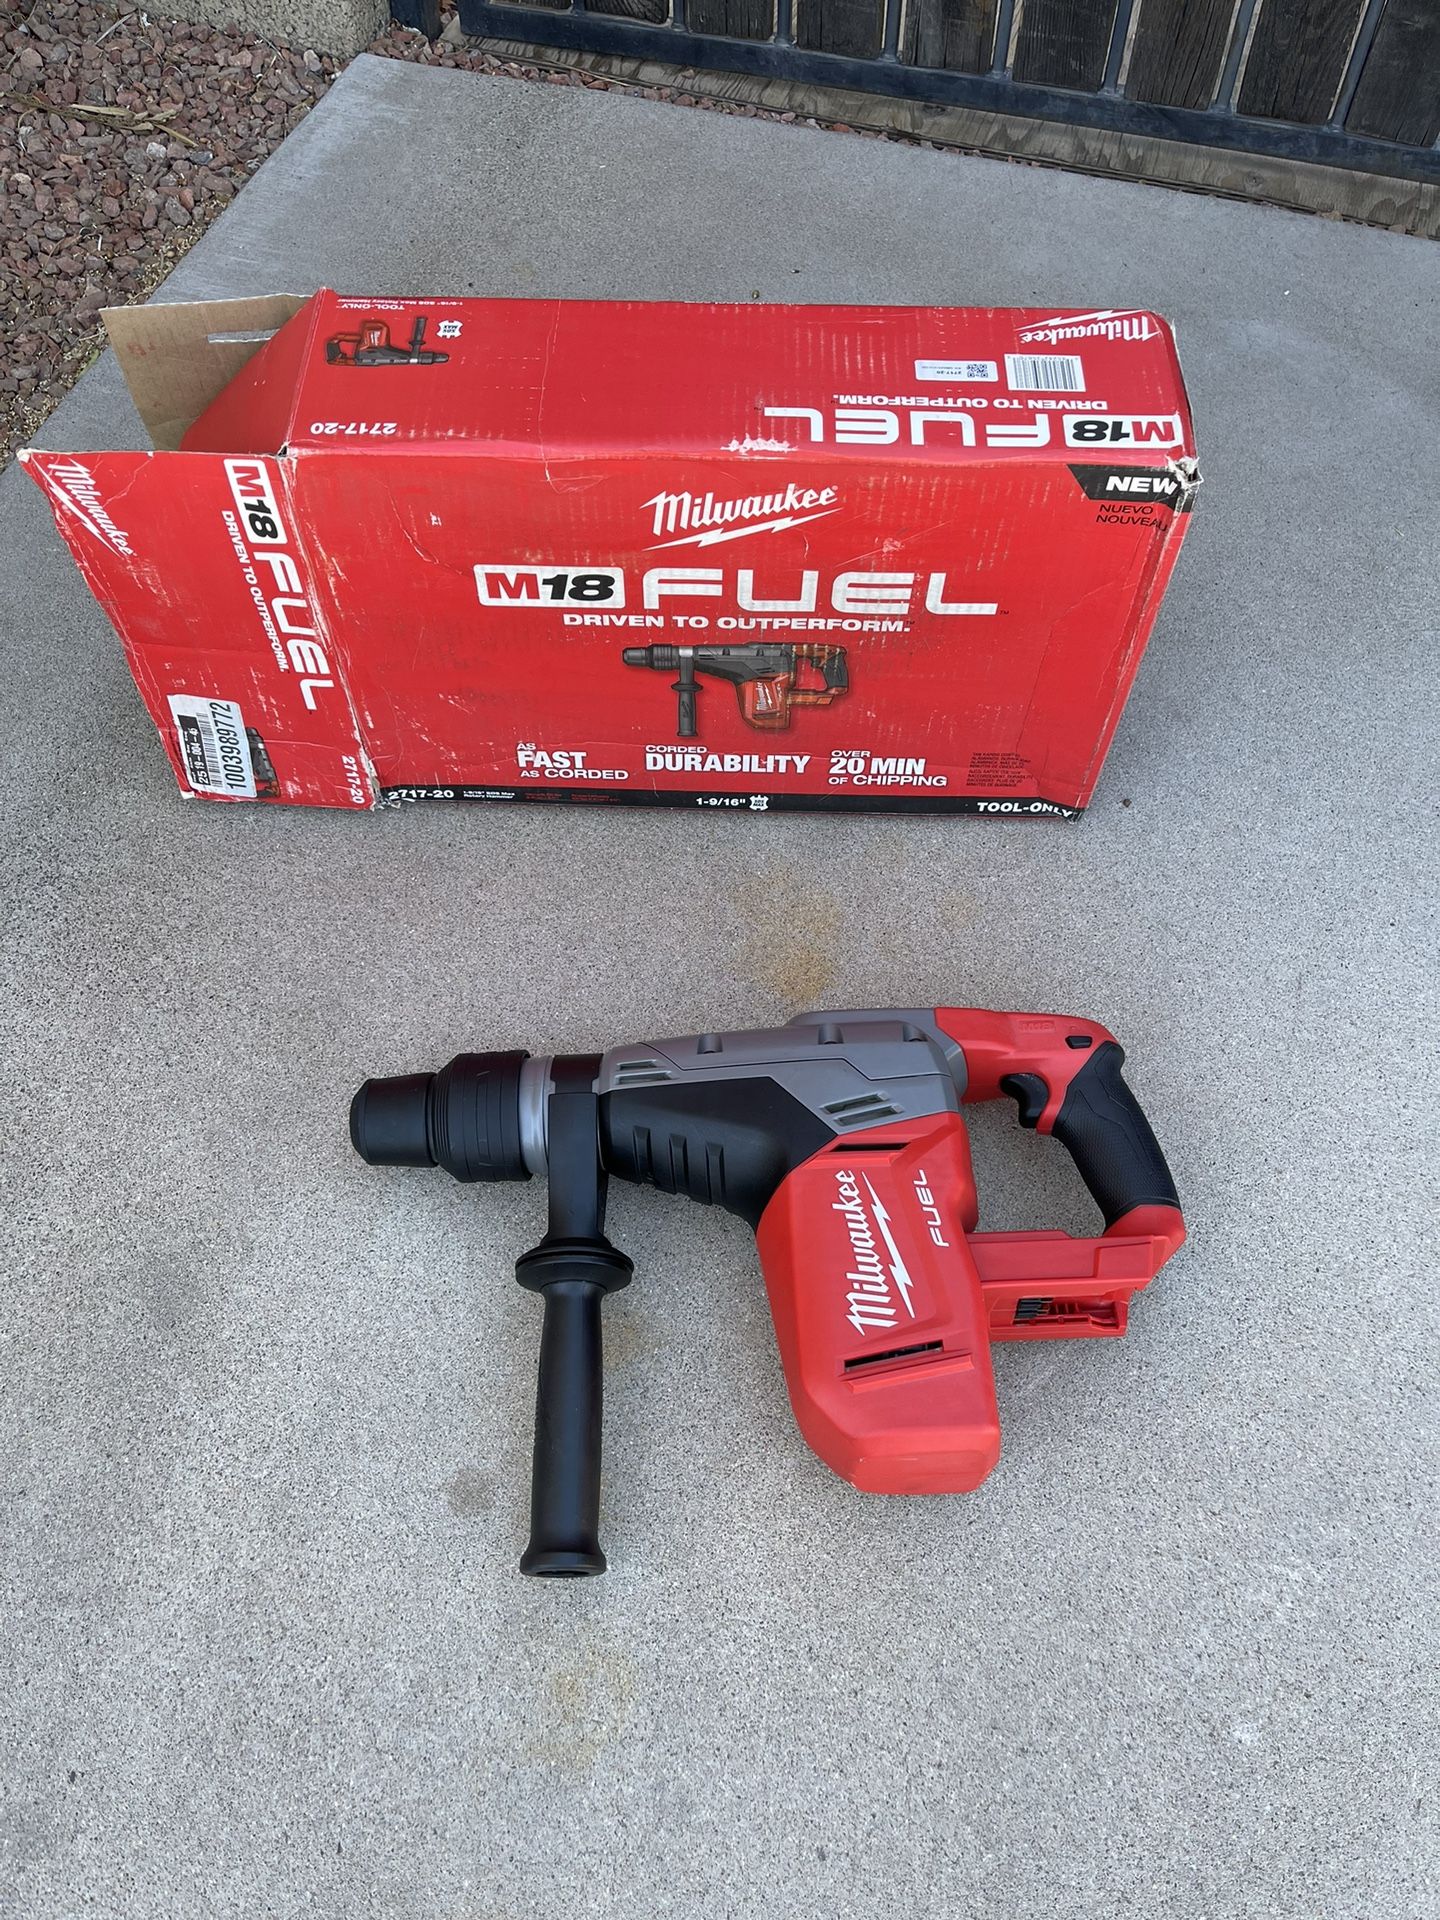 Milwaukee M18 FUEL 18V Lithium-Ion Brushless Cordless 1-9/16 in. SDS-Max Rotary Hammer (Tool-Only)